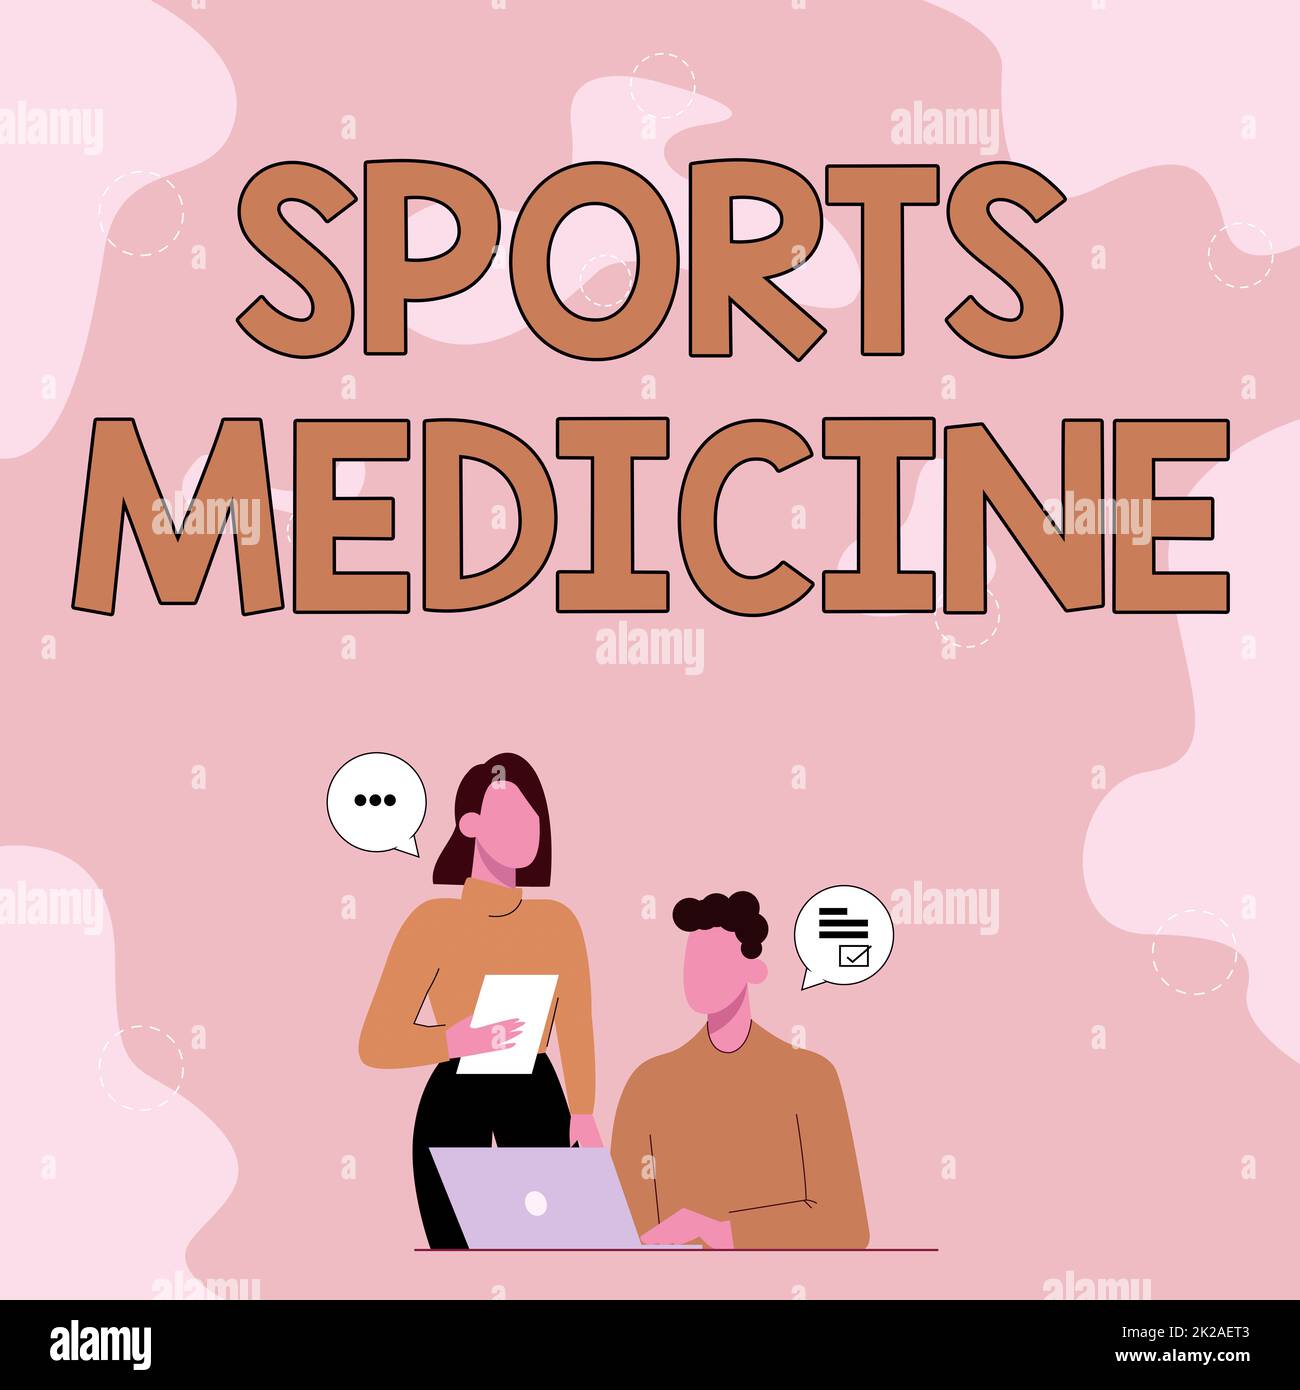 Inspiration showing sign Sports Medicine. Word Written on Treatment and prevention of injuries related to sports Partners Sharing New Ideas For Skill Improvement Work Strategies. Stock Photo